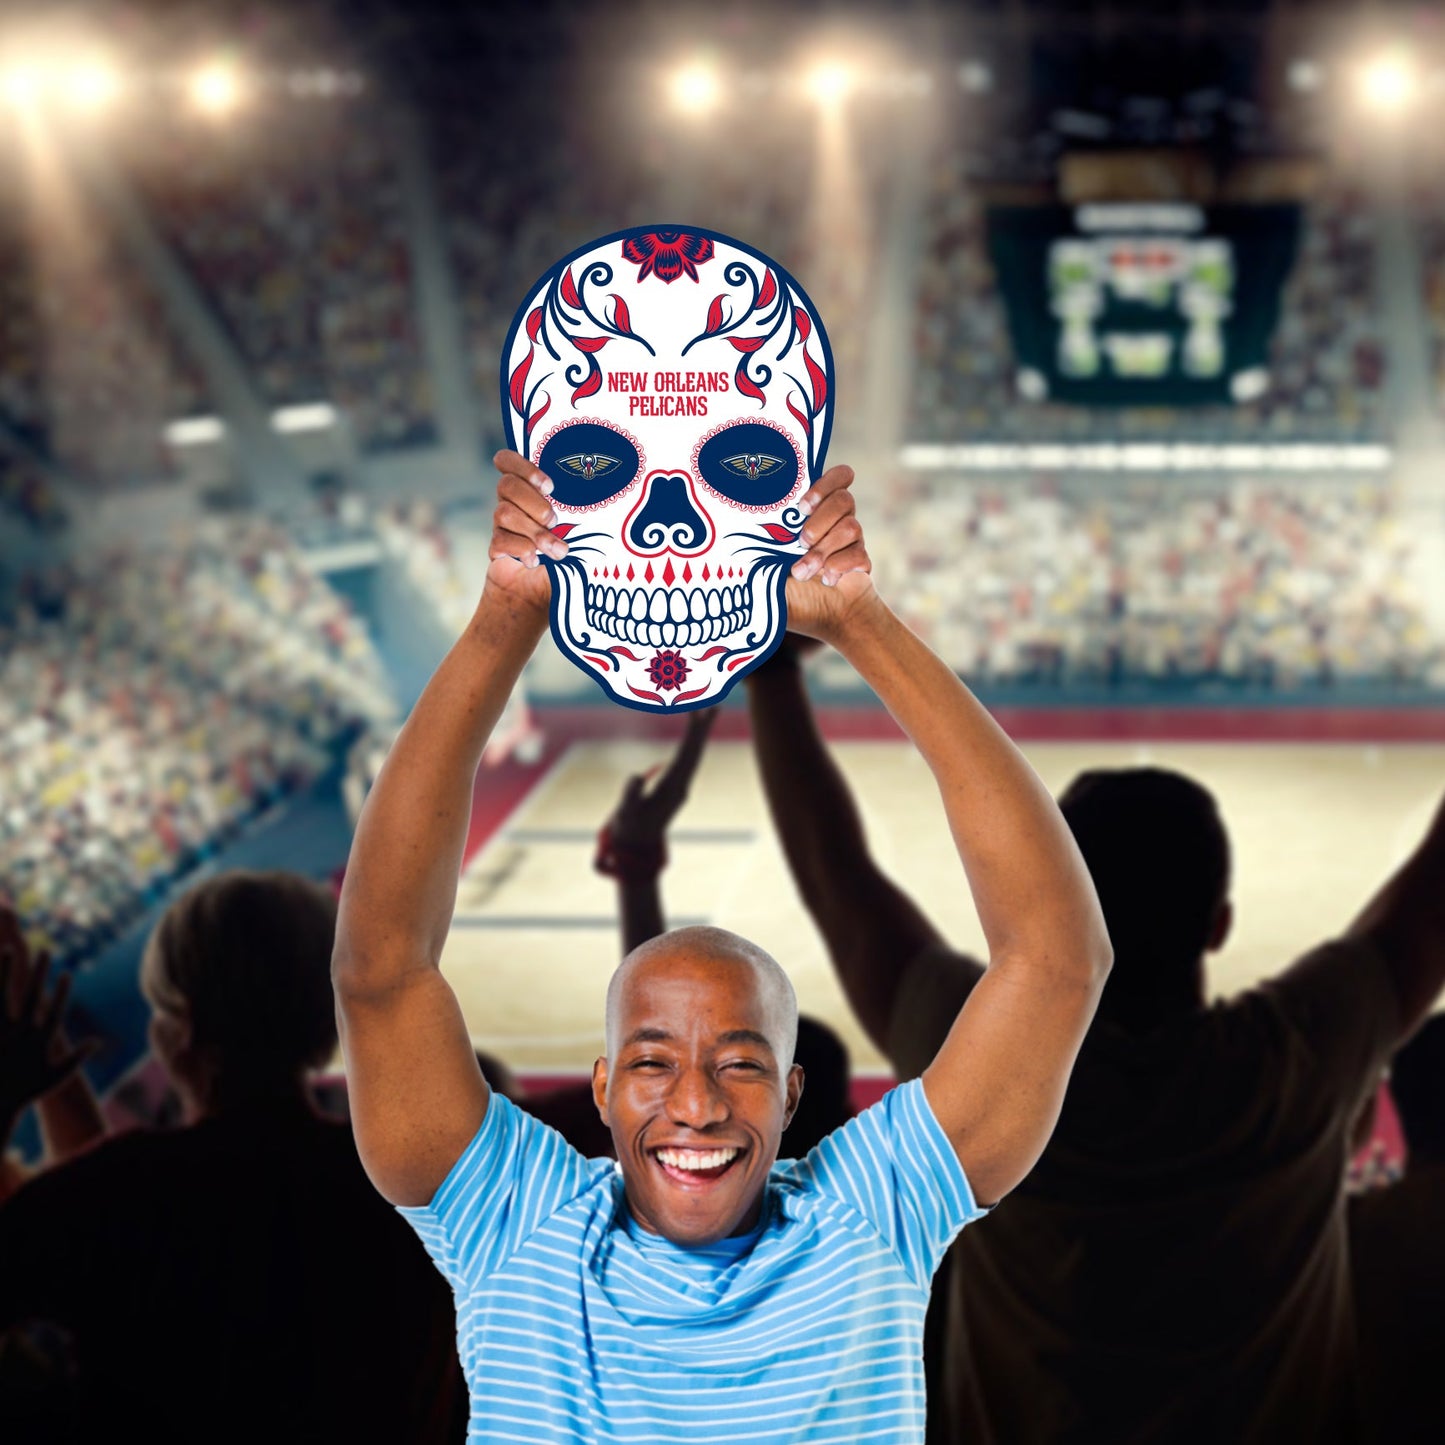 New Orleans Pelicans: Skull Foam Core Cutout - Officially Licensed NBA Big Head